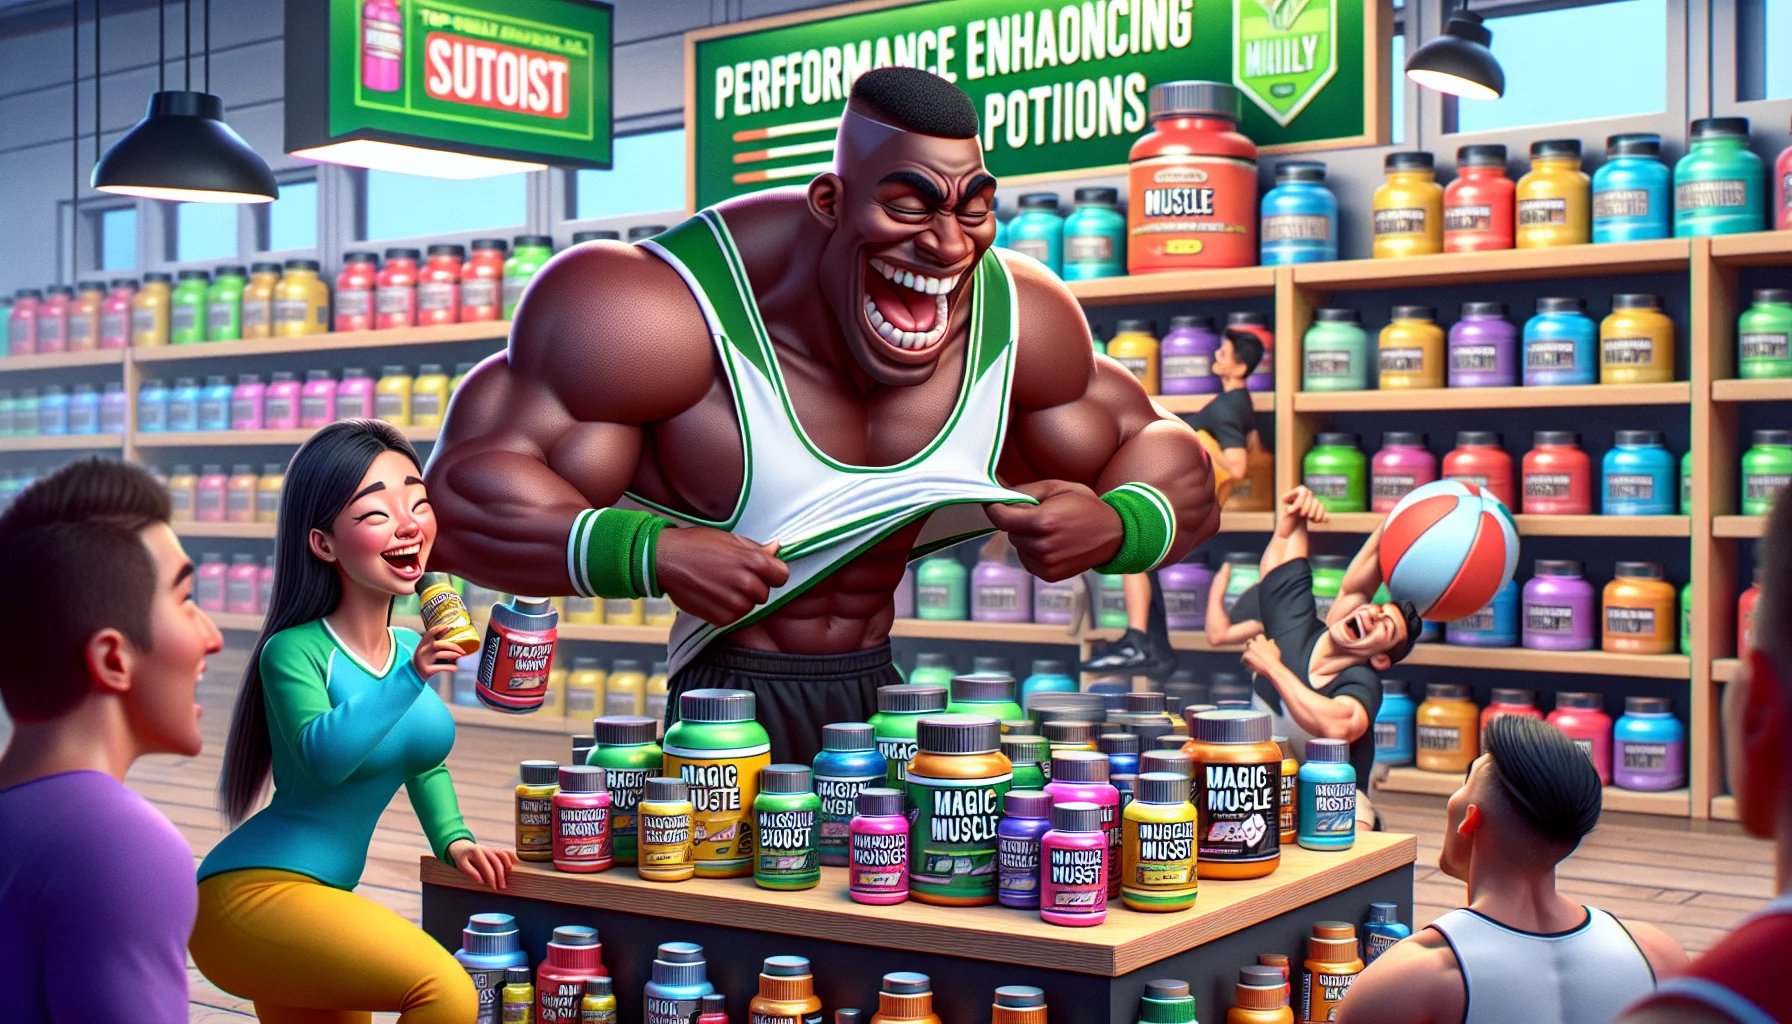 An amusing and realistic scenario featuring a display of top-quality supplements designed for athletes. A Hispanic male soccer player with a comically muscular build tries to fit into his too-small jersey, while an Asian female basketball player laughs, holding a bottle labelled 'Magic Muscle Boost'. In the foreground, a Black male weight-lifter struggles to lift a dumbbell shaped like a giant vitamin pill. In the background, there's a stand filled with colorful supplement bottles, labelled for various sports, with a brightly-lit sign reading 'Performance Enhancing Potions'. No brands should be evident.